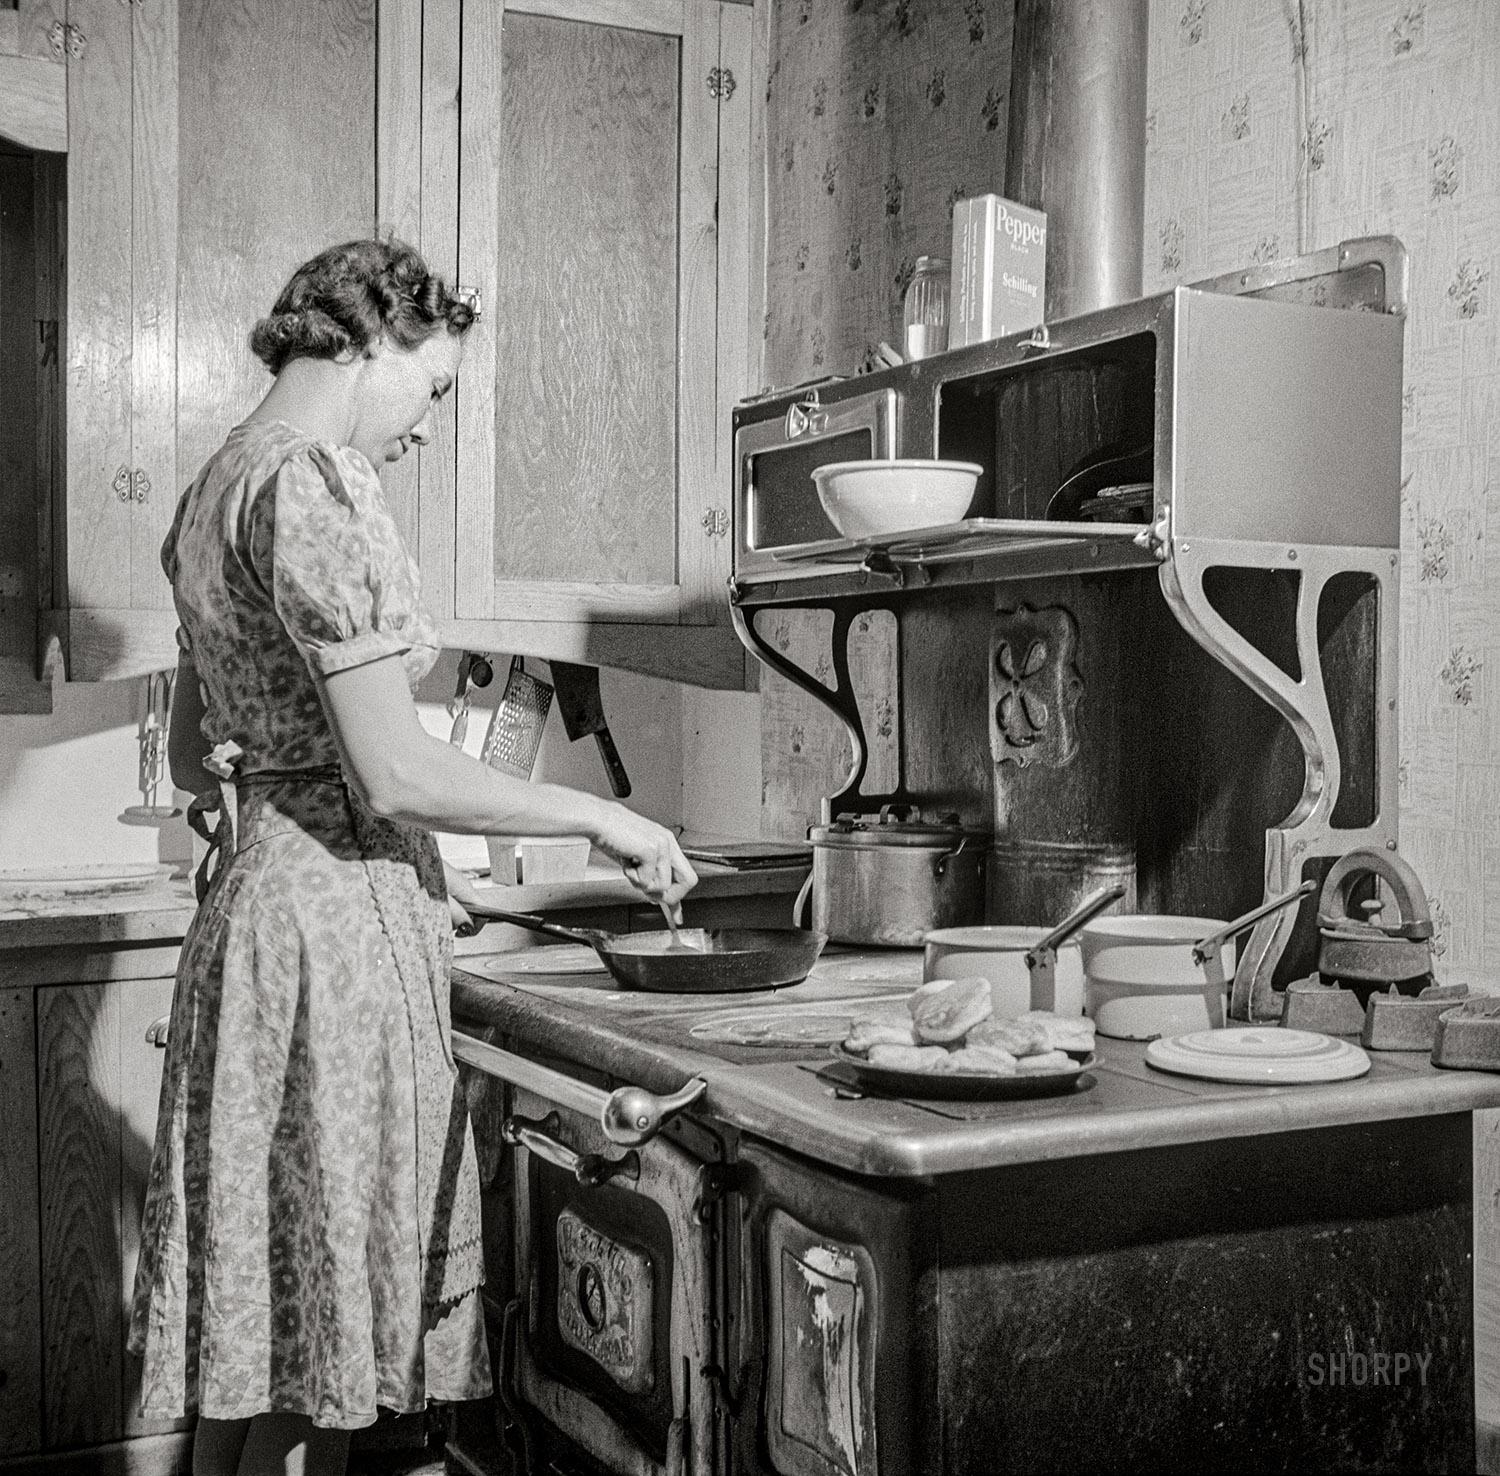 February 1943. "Moreno Valley, Colfax County, New Mexico. William Heck's wife getting supper." Nitrate negative by John Collier for the Office of War Information. View full size.